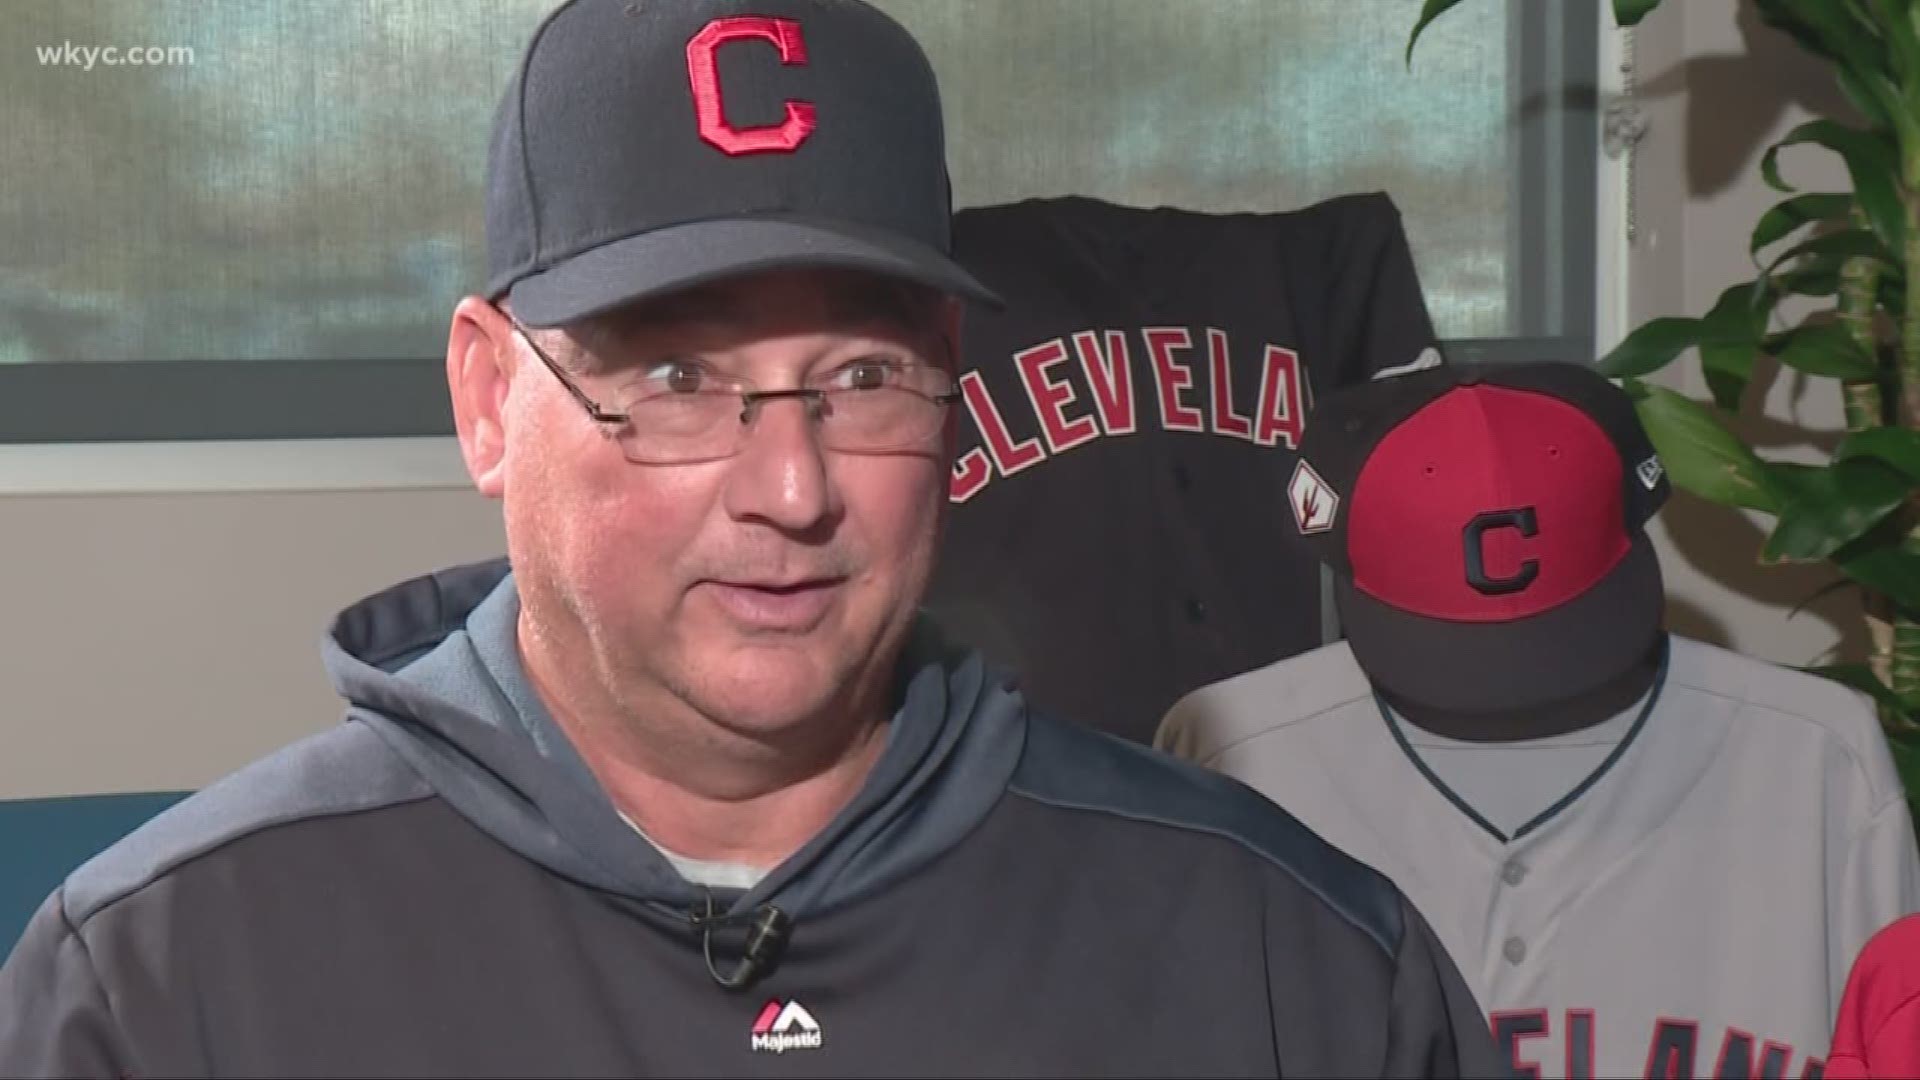 June 24, 2019: Terry Francona is a fantastic storyteller, those that know him would agree. Tito can own a room, so we decided to ask if he could share a baseball story with us on camera. Without hesitation, Francona brought up a memory from 1990 when he played for the Milwaukee Brewers. Enjoy!